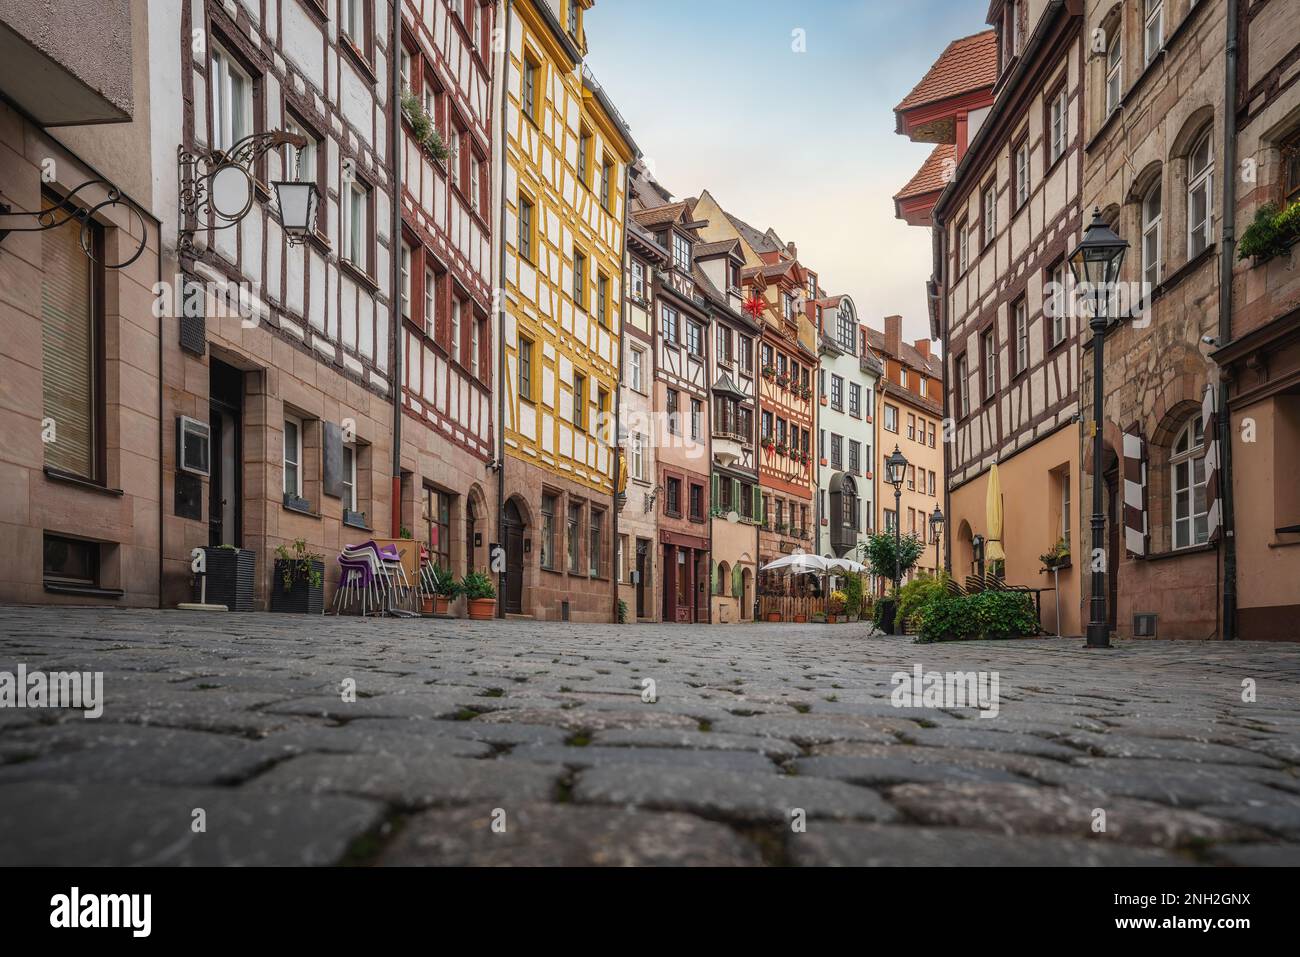 Colorful traditional Half-timbered buildings at Weissgerbergasse street - Nuremberg, Bavaria, Germany Stock Photo